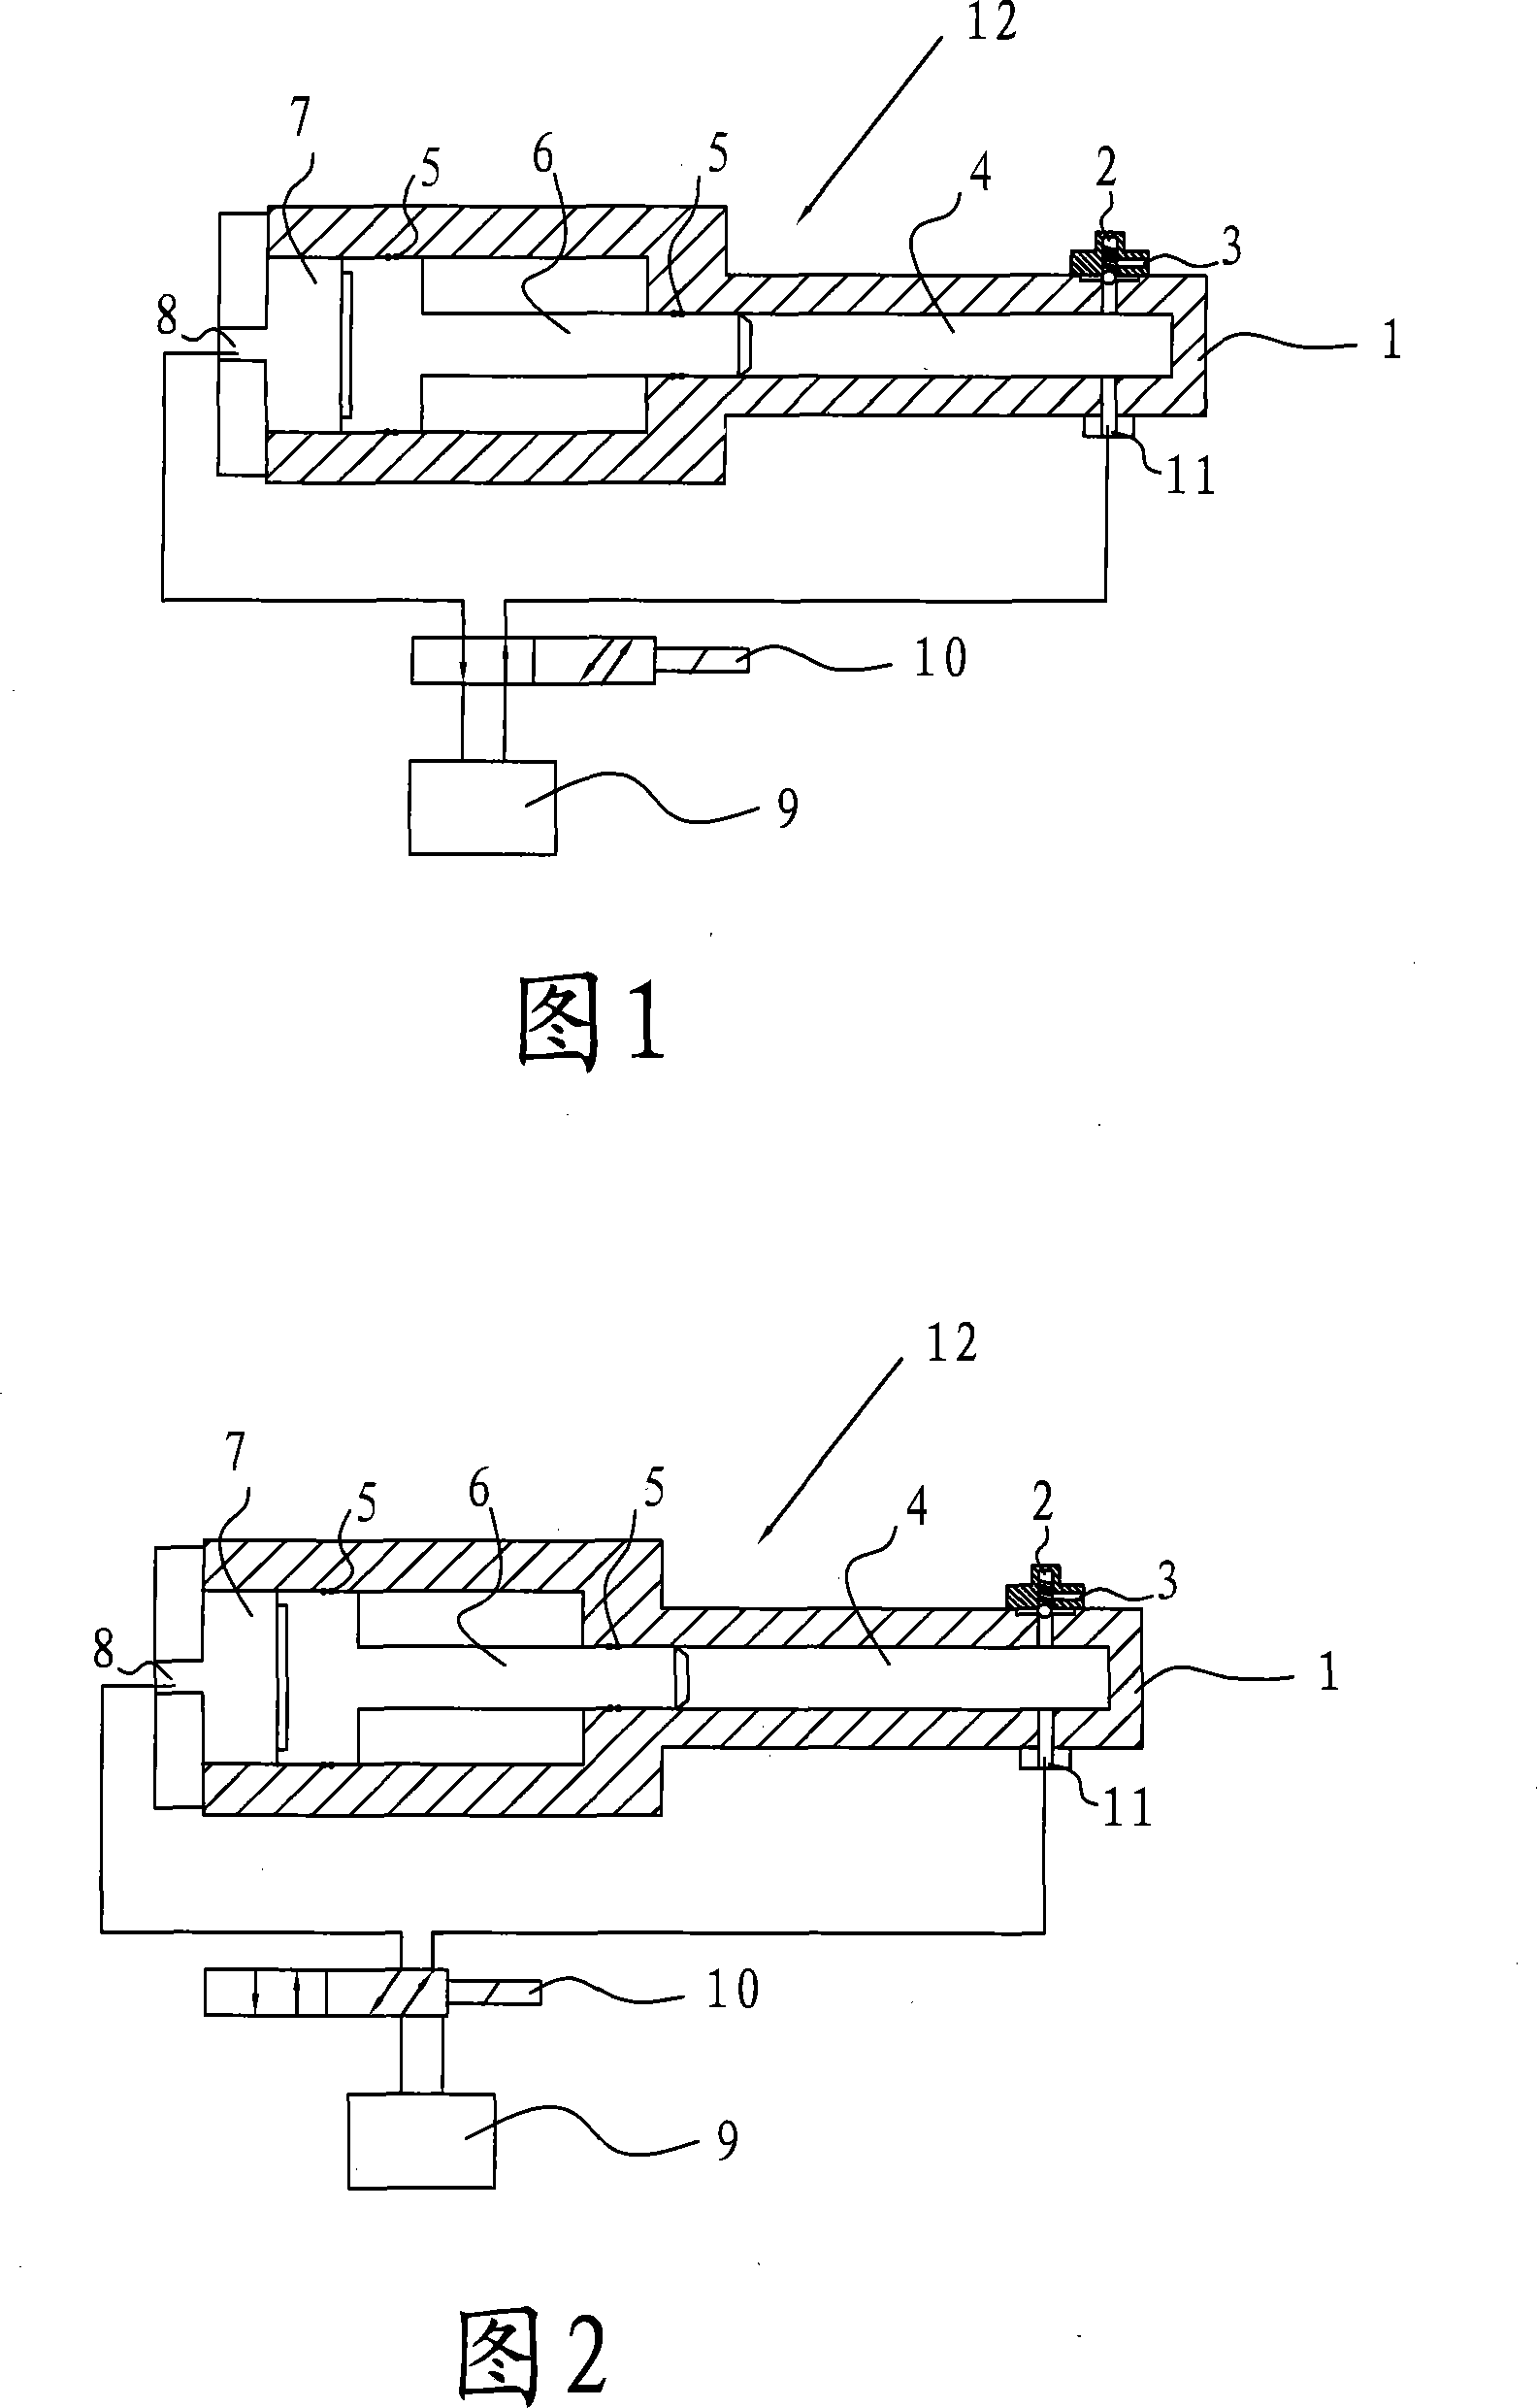 Main blowing system for weft insertion